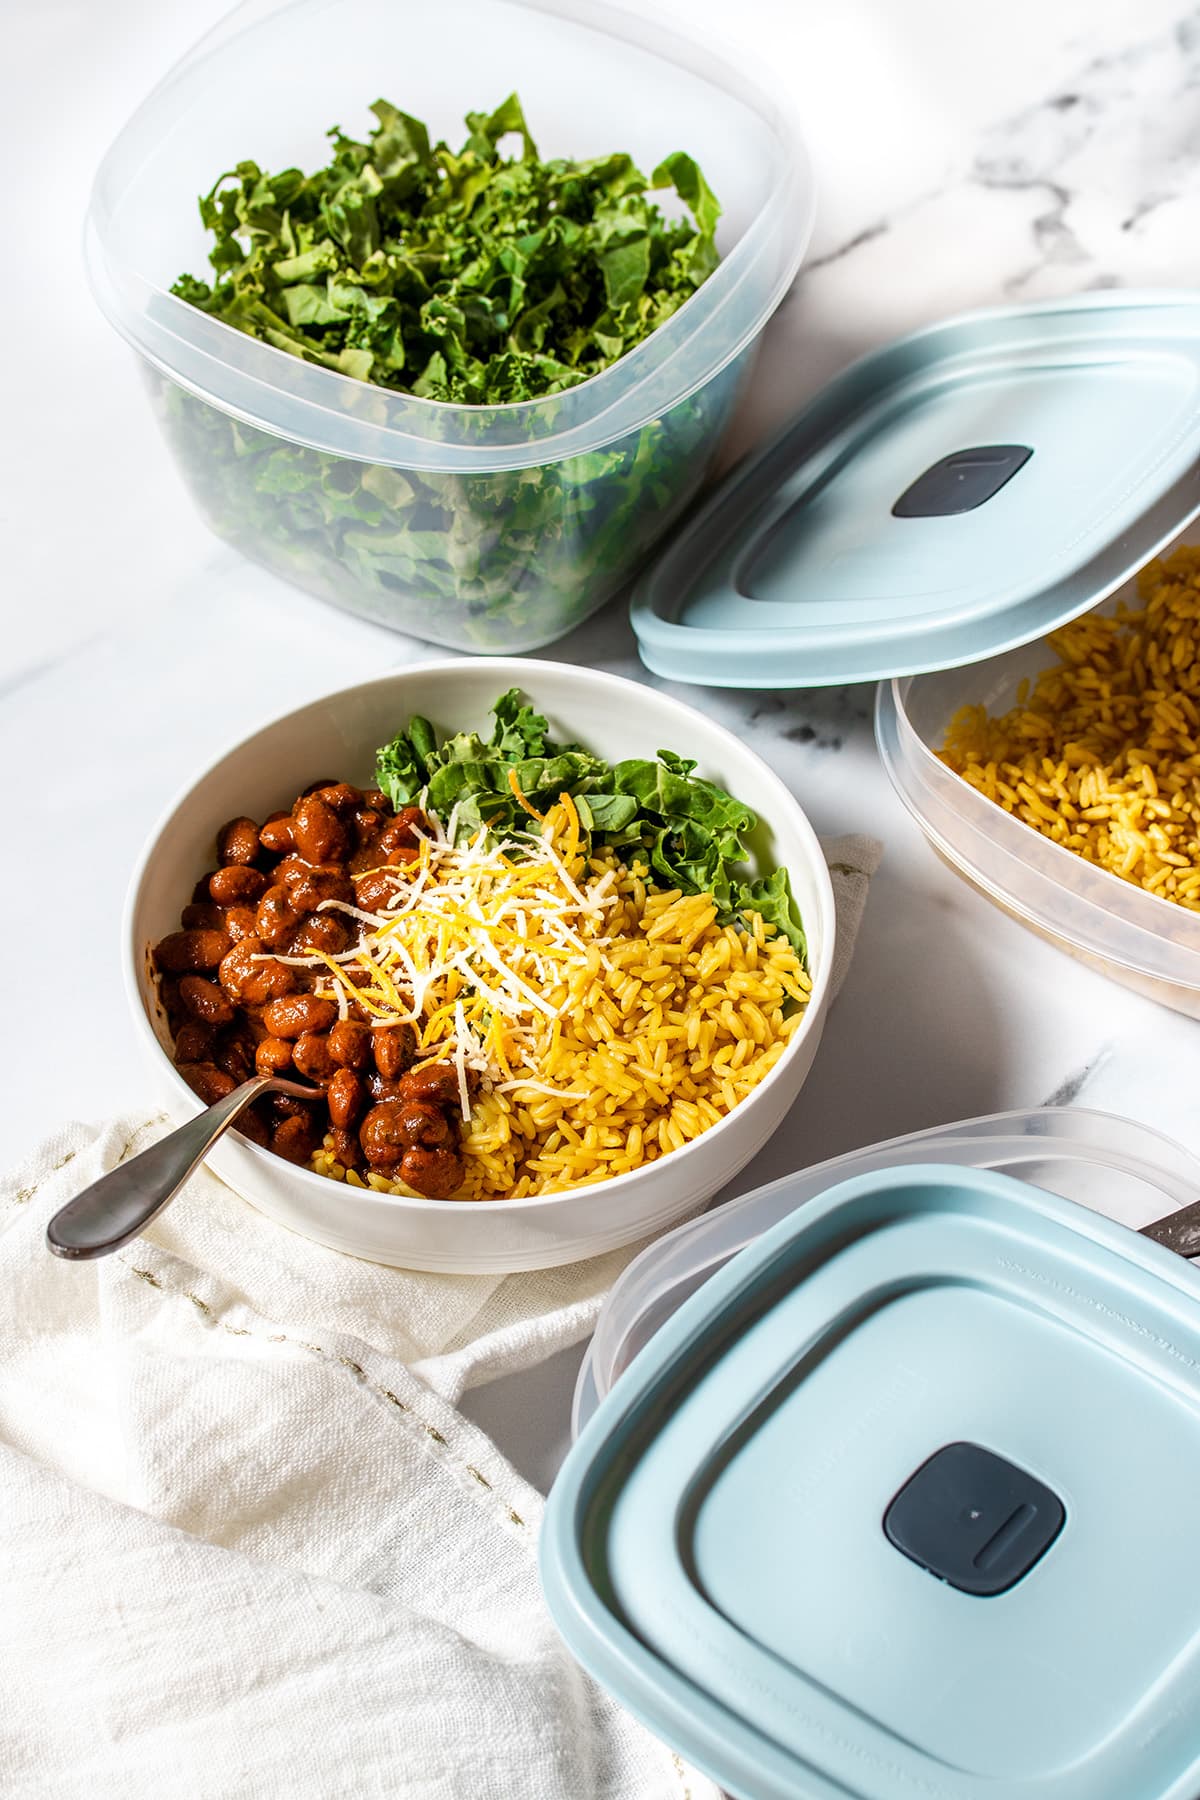 Plastic containers with blue lids and greens and rice in two next to a bowl with beans, rice and greens in it.